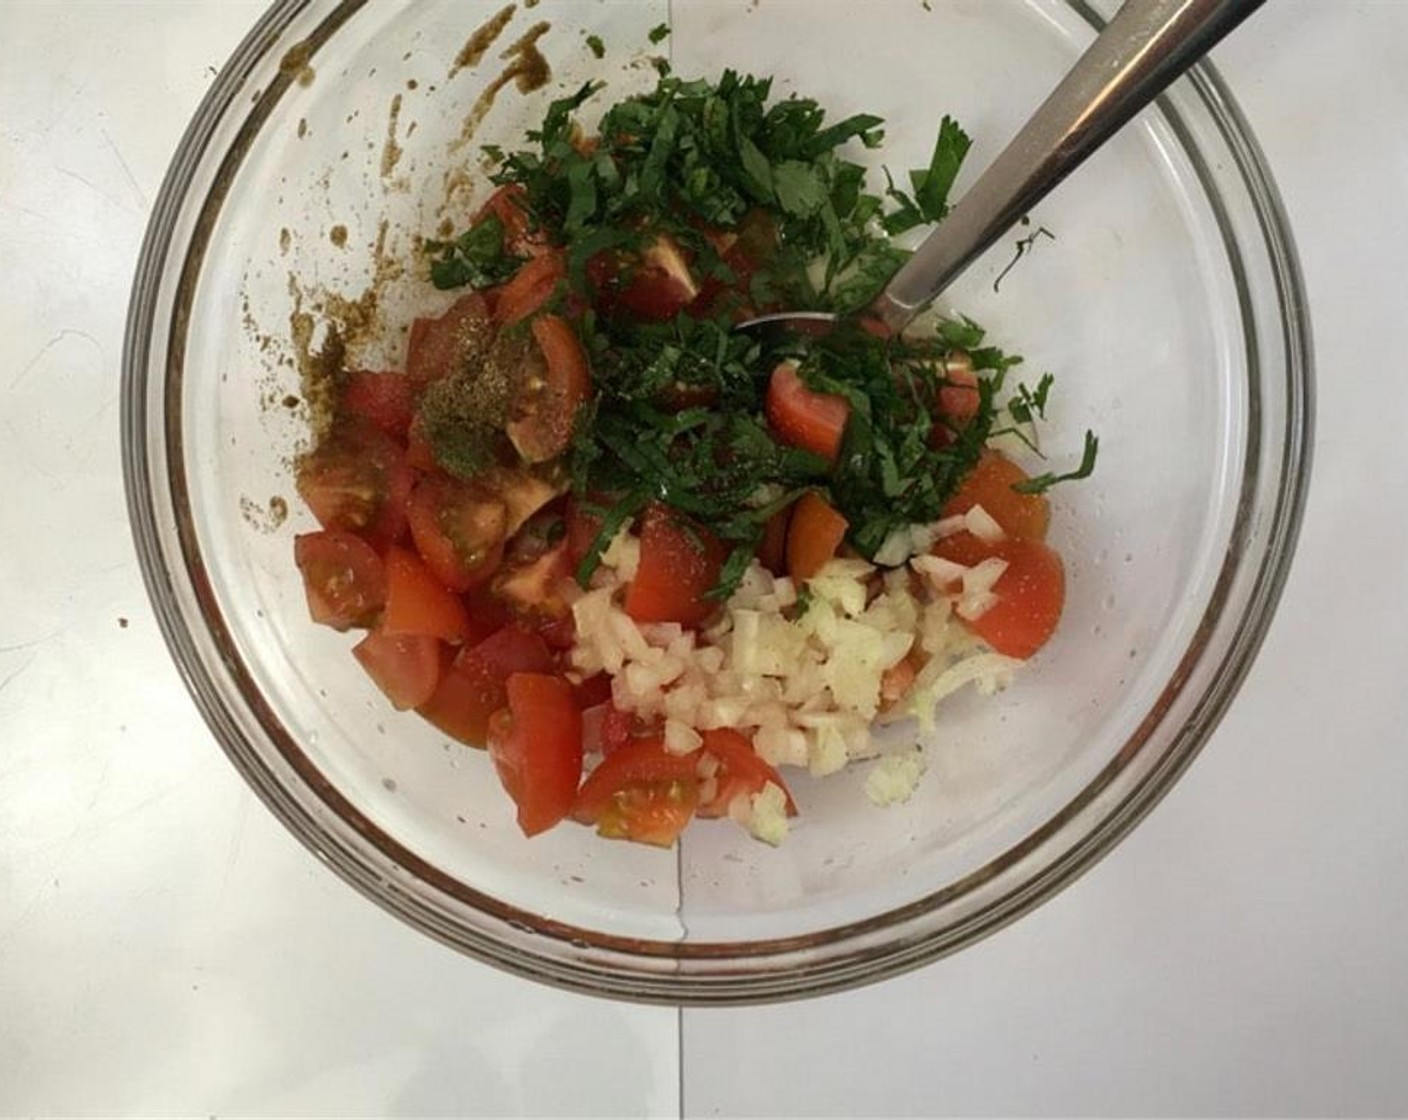 step 3 In a bowl, add Cherry Tomatoes (10), Onions (2 Tbsp), McCormick® Garlic Powder (to taste), Salt (to taste), Ground Black Pepper (to taste), Ground Cumin (1/4 tsp), juice from Lime (1), Fresh Cilantro (1 handful), and Fresh Mint (1/2 handful). Stir well and place the mixture in the fridge to chill.